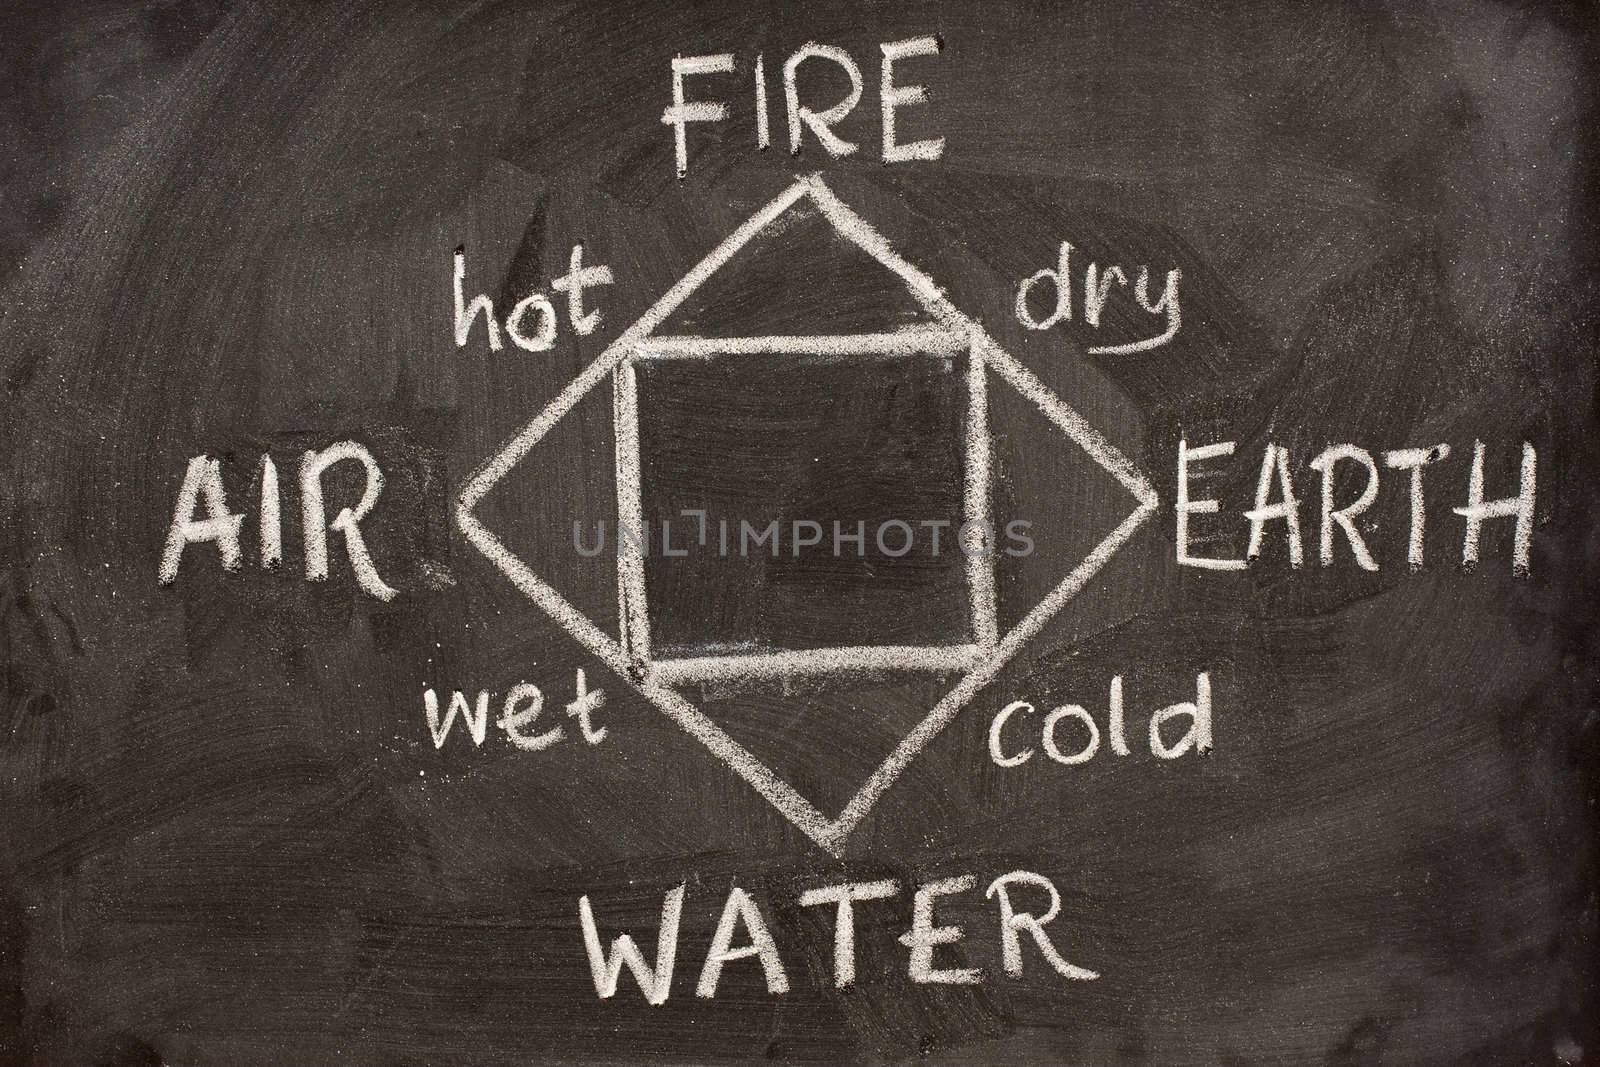 diagram of four classical elements of Greek philosophy (fire, earth, air, water) nd their properties (hot, dry, wet, cold) sketched with white chalk on blackboard